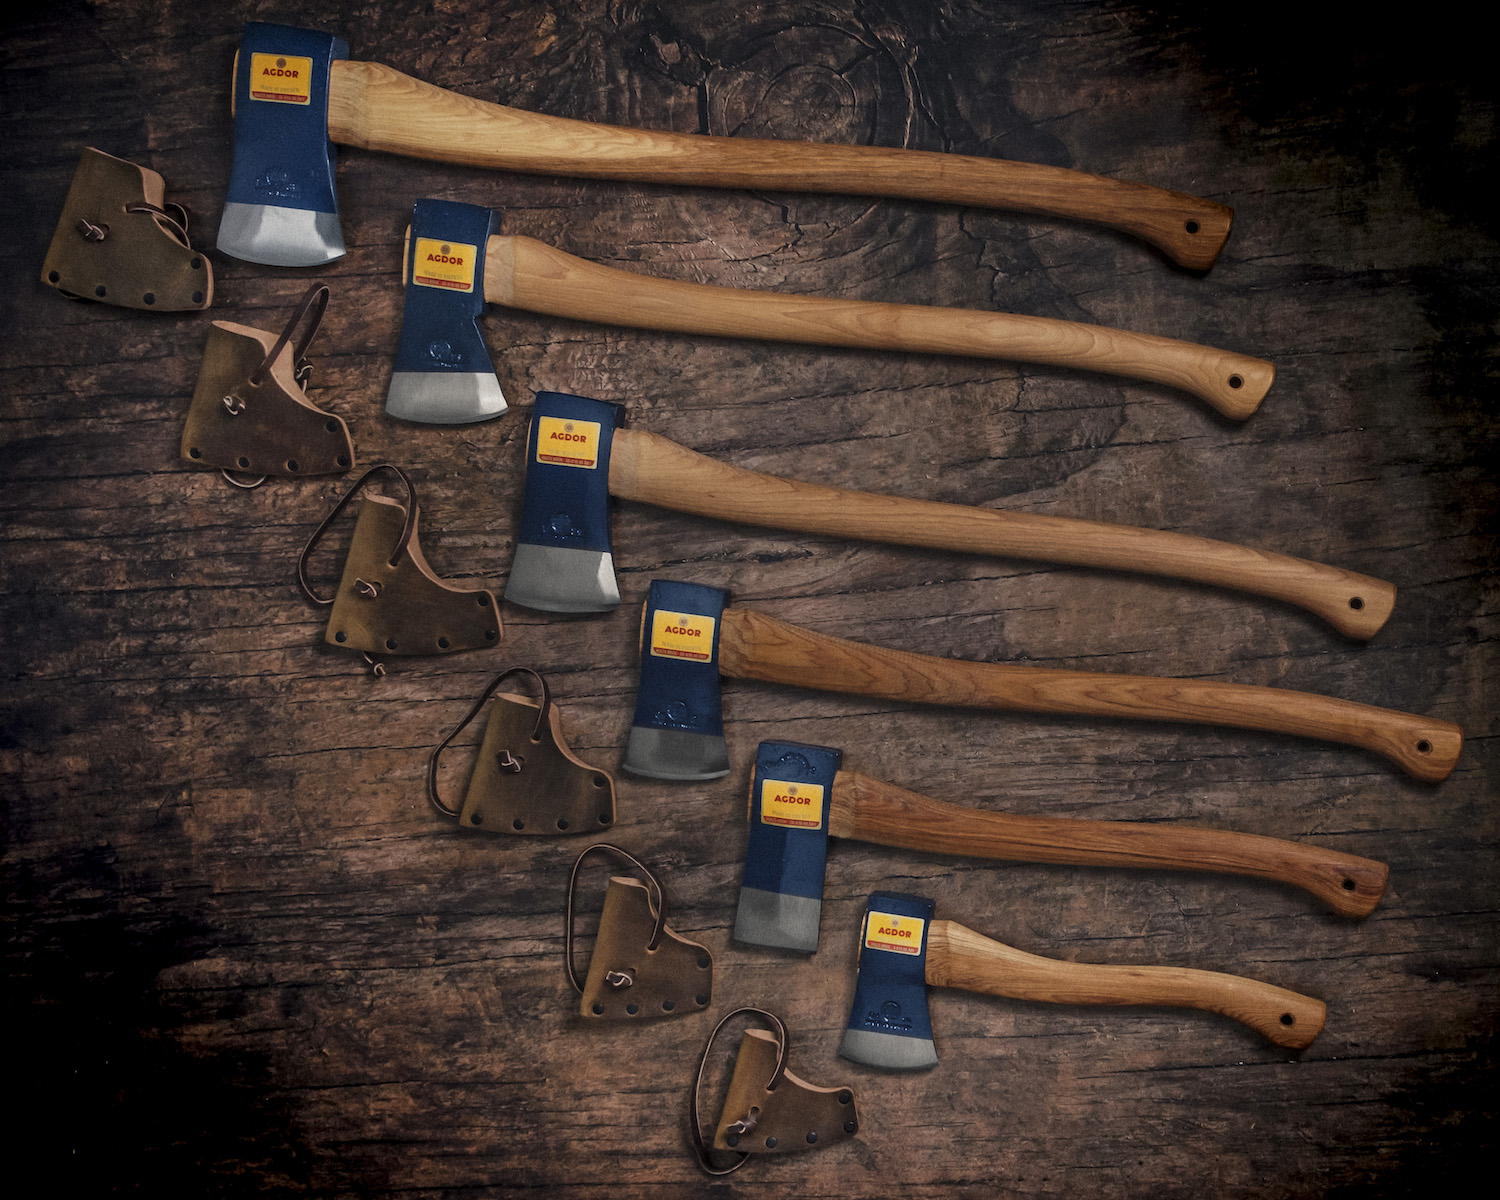 The six Agdor axes from Hults Bruk that are now on sale in the U.S. as of 2021 with their leather sheaths lying on a wood table